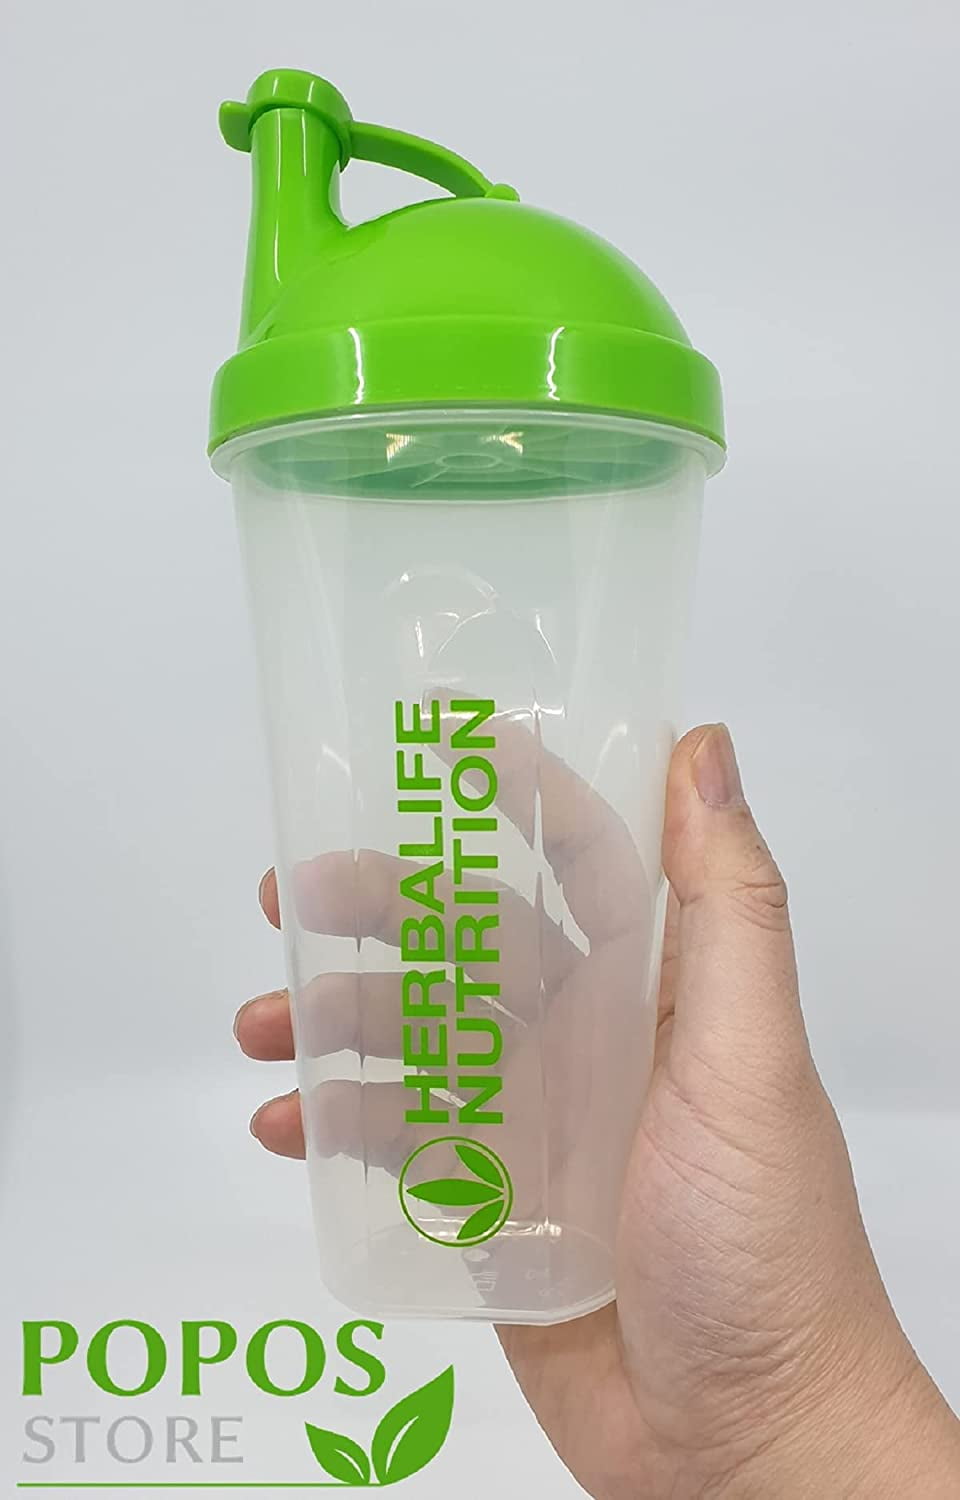 600ml Herbalife protein shaker bottle with 304 mixer